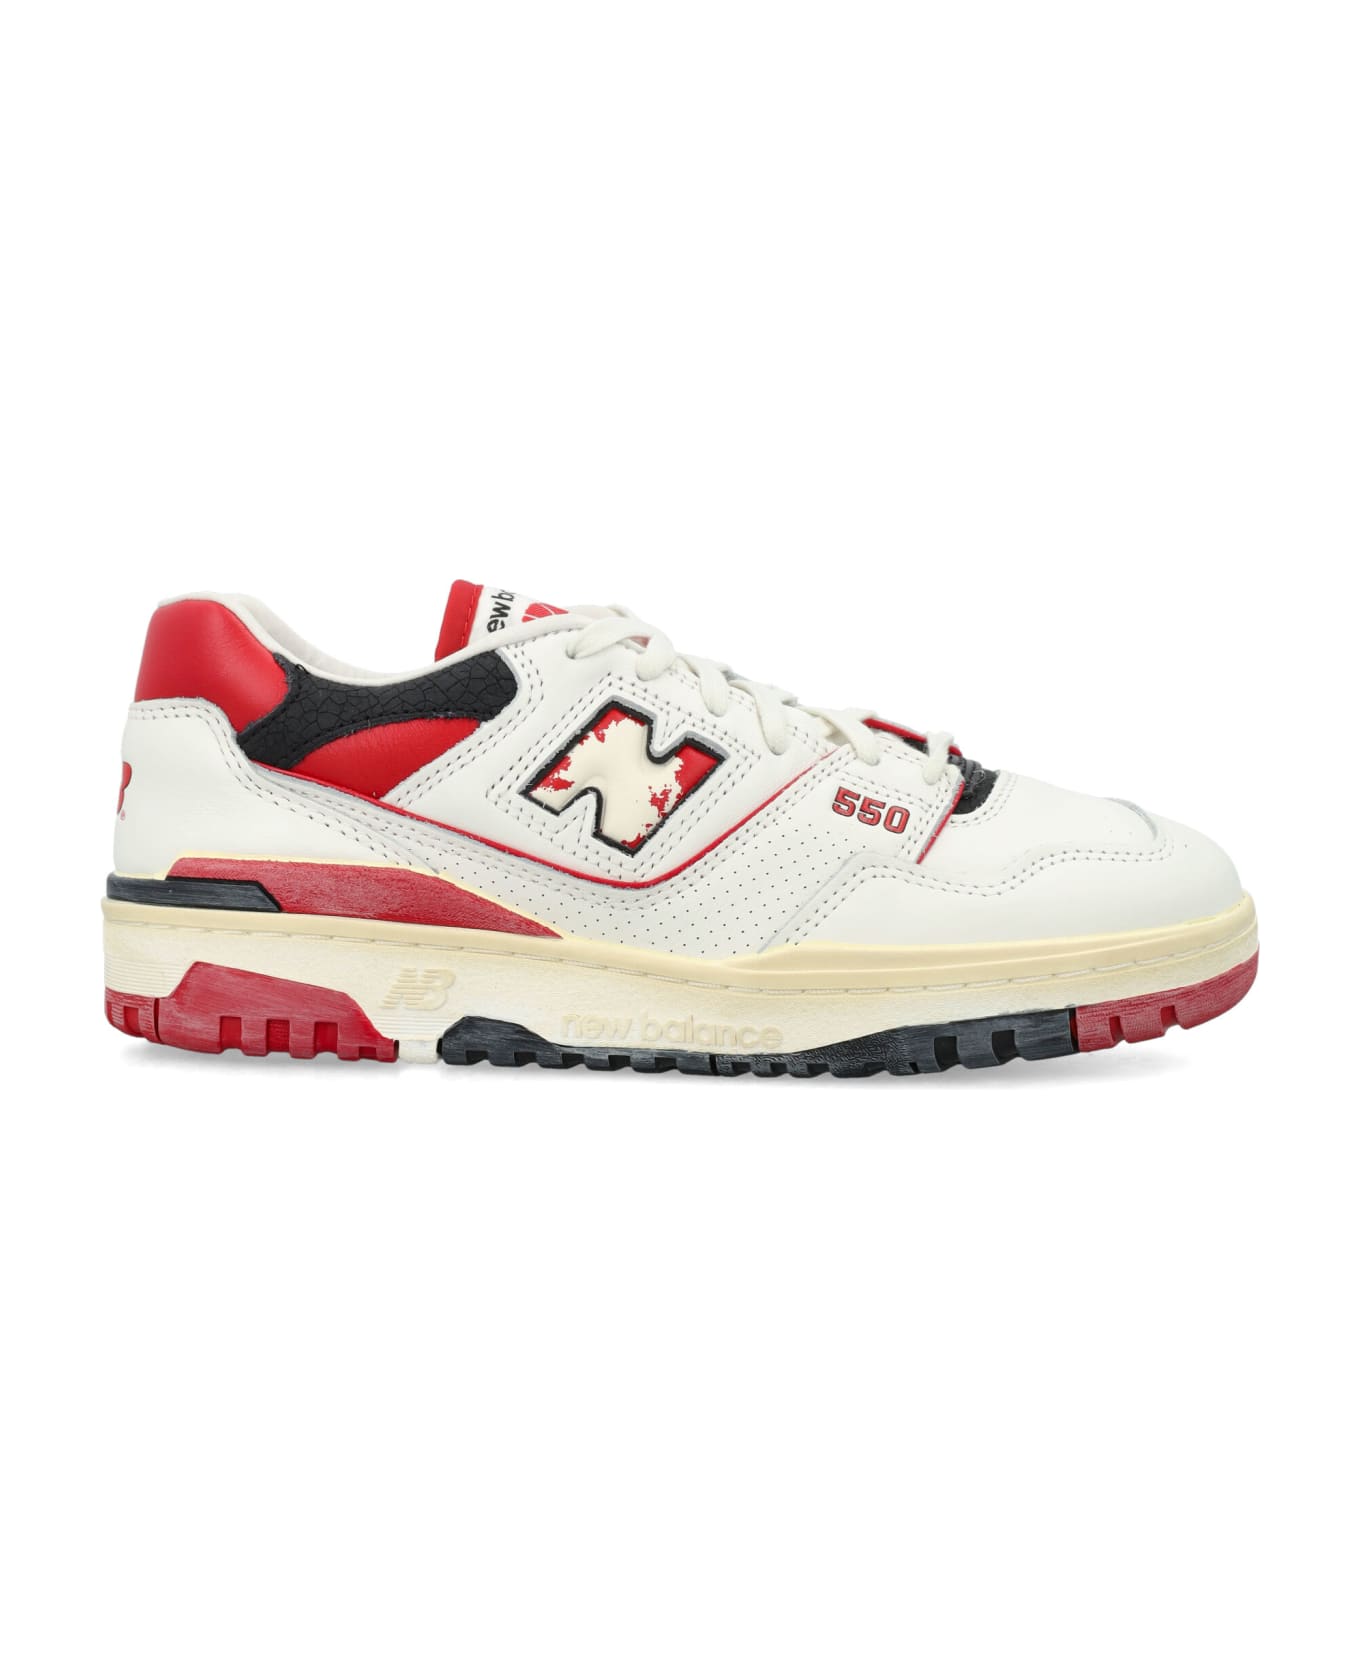 New Balance 550 Sneakers - WHITE RED スニーカー